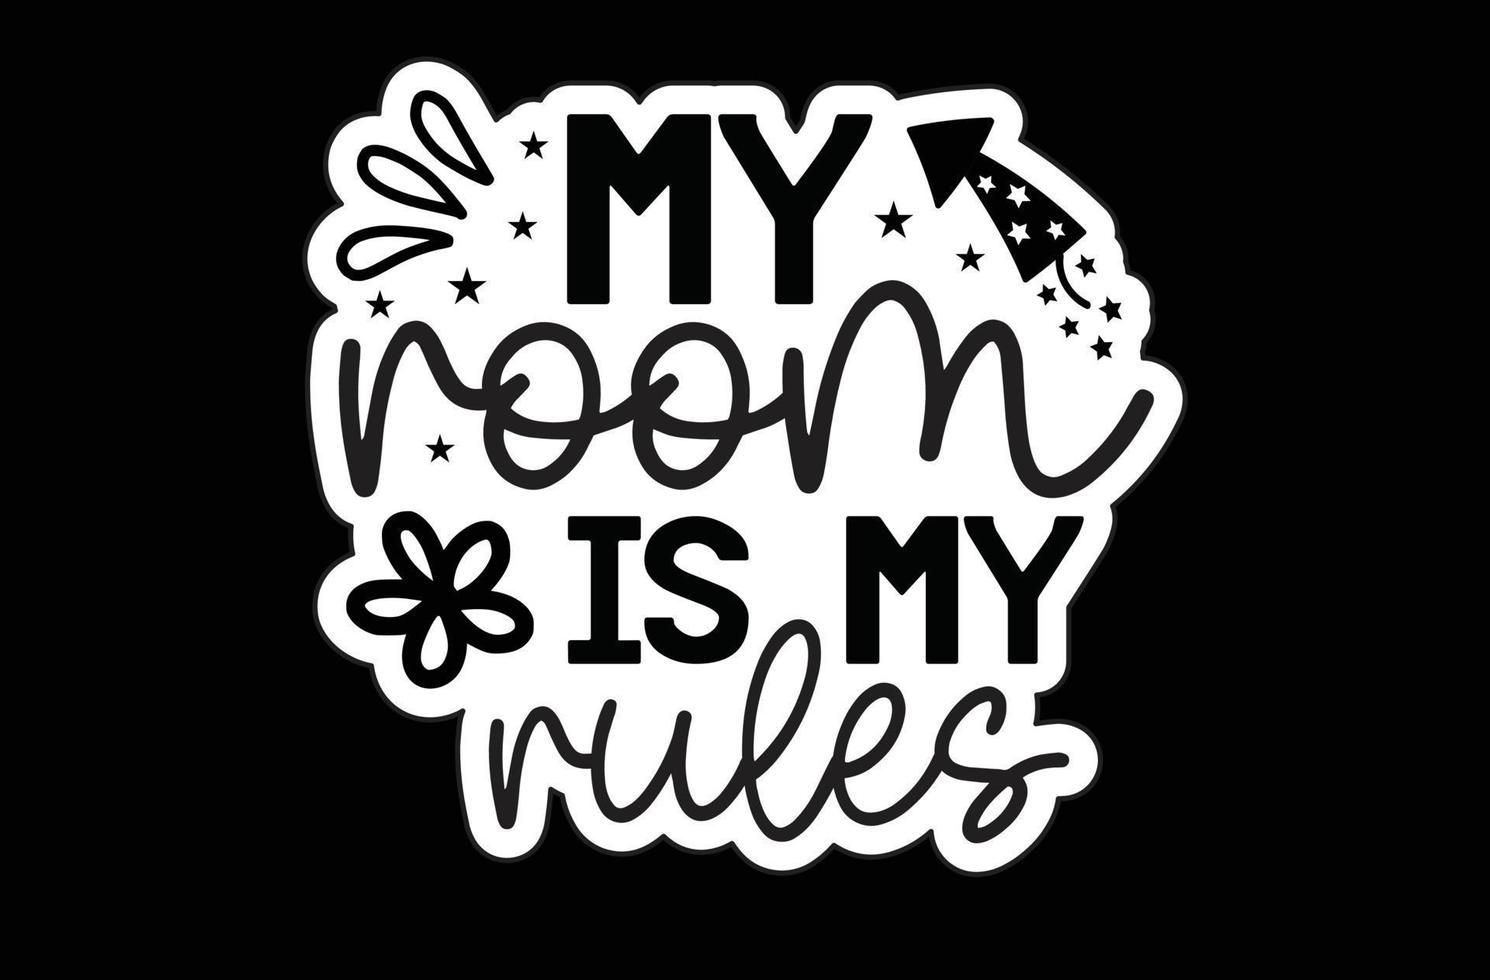 My Room is My Rules svg sticker design vector